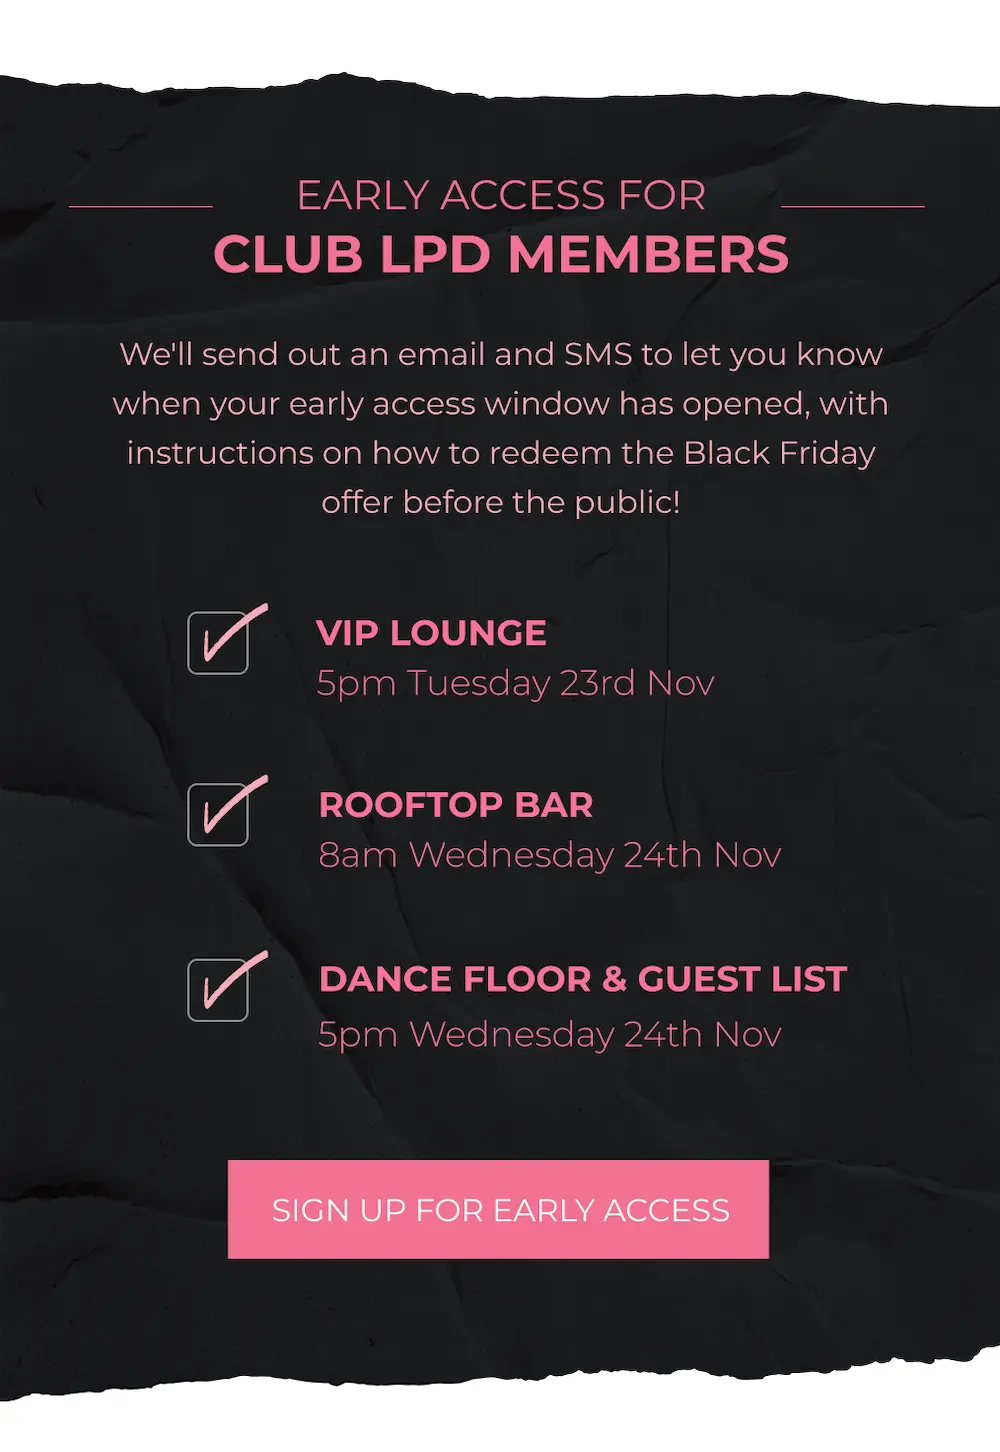 Image of an early access sign-up form from Little Party Dress.